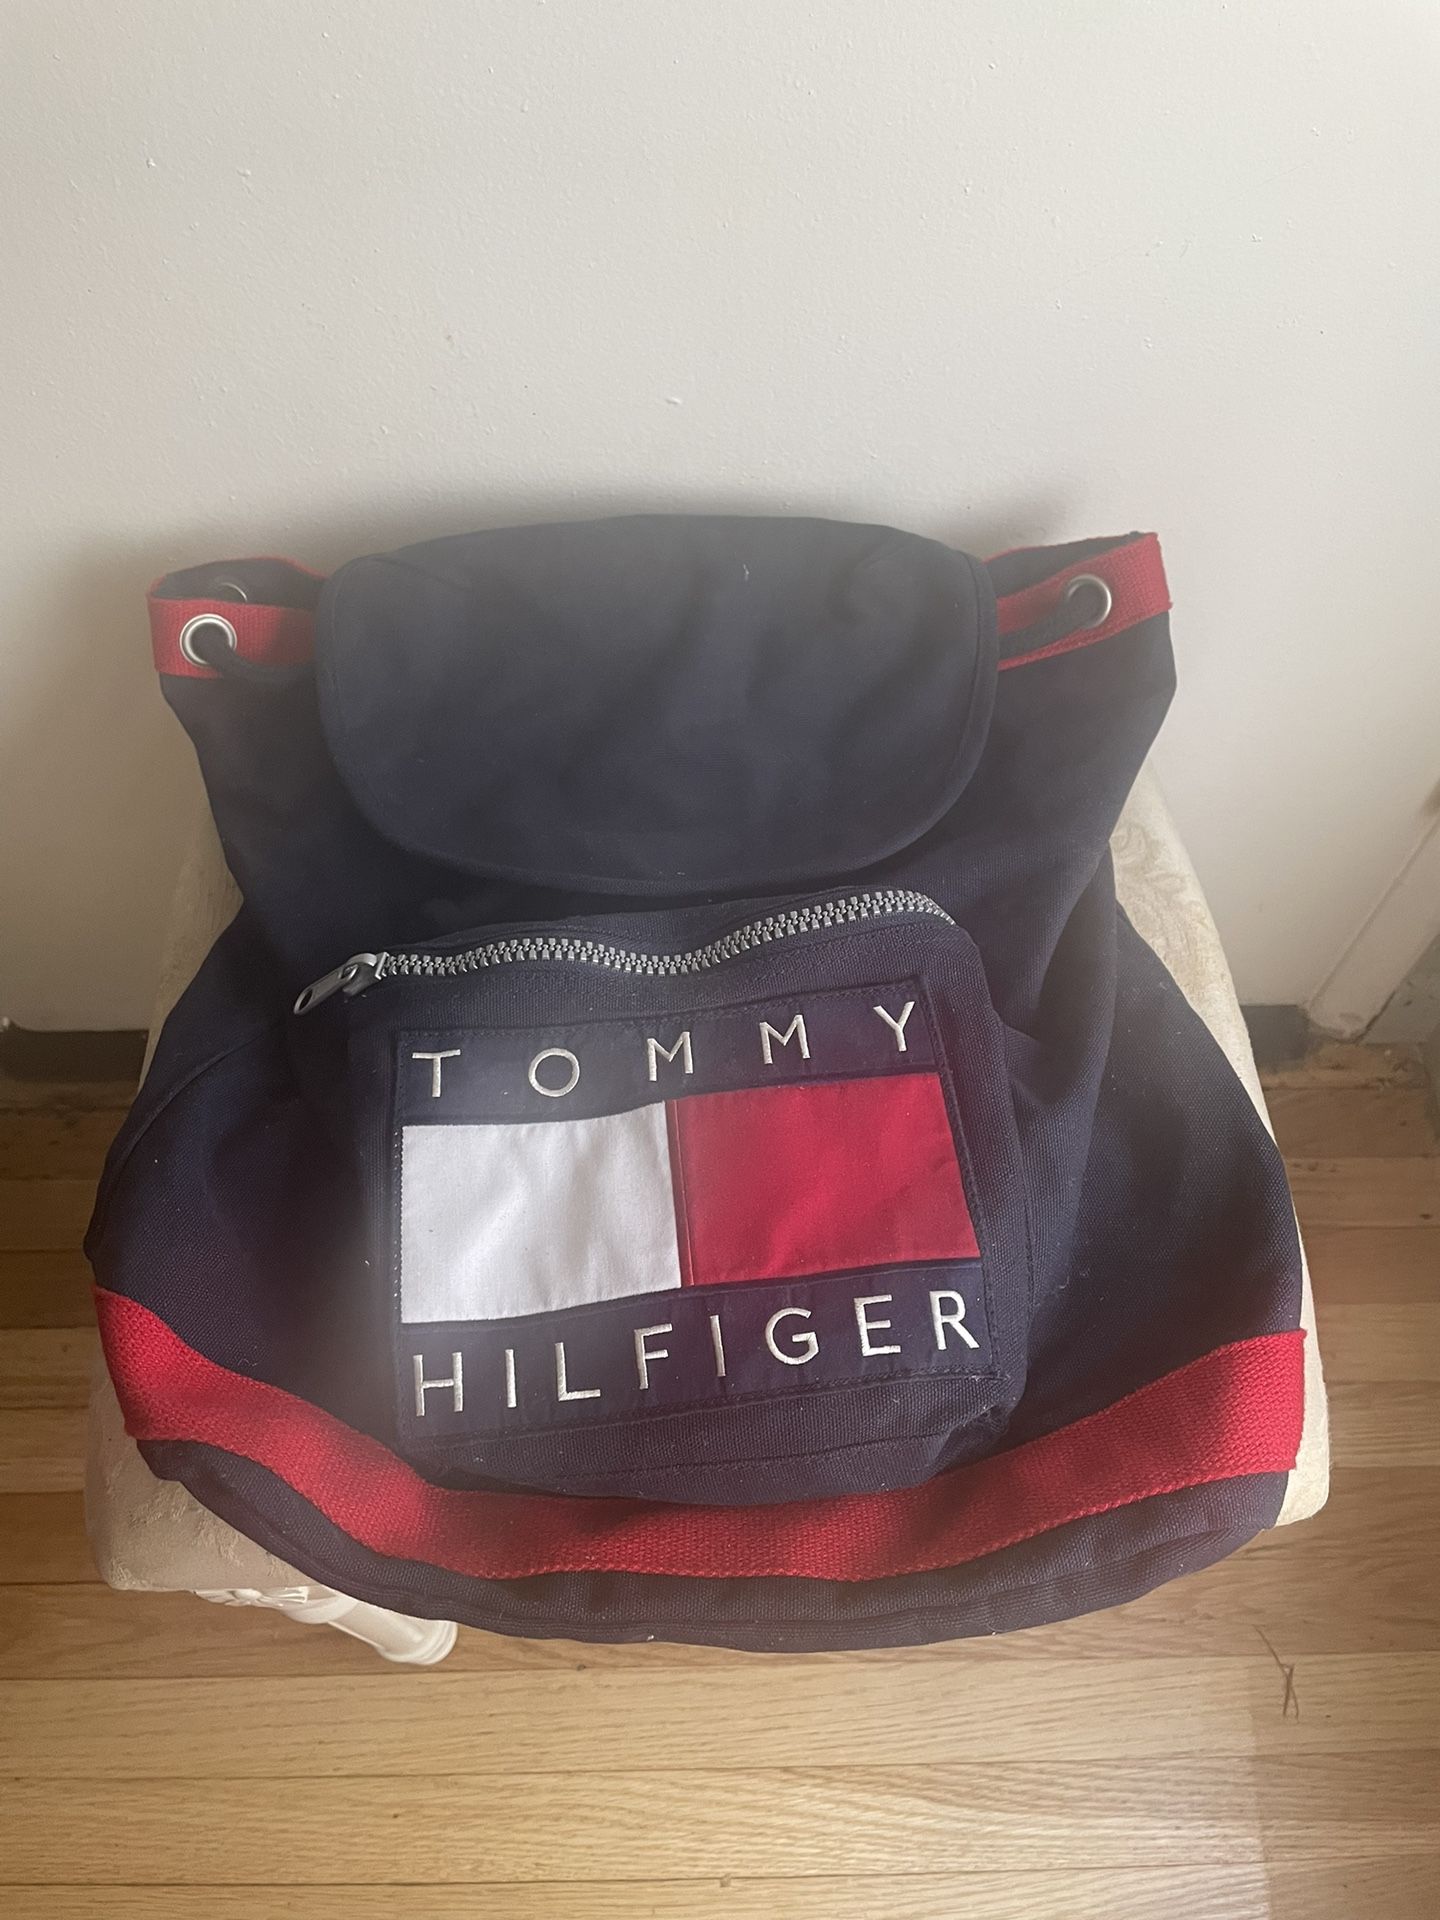 Tommy Hilfiger Vintage Drawstring Backpack - Feel Free to Ask Questions